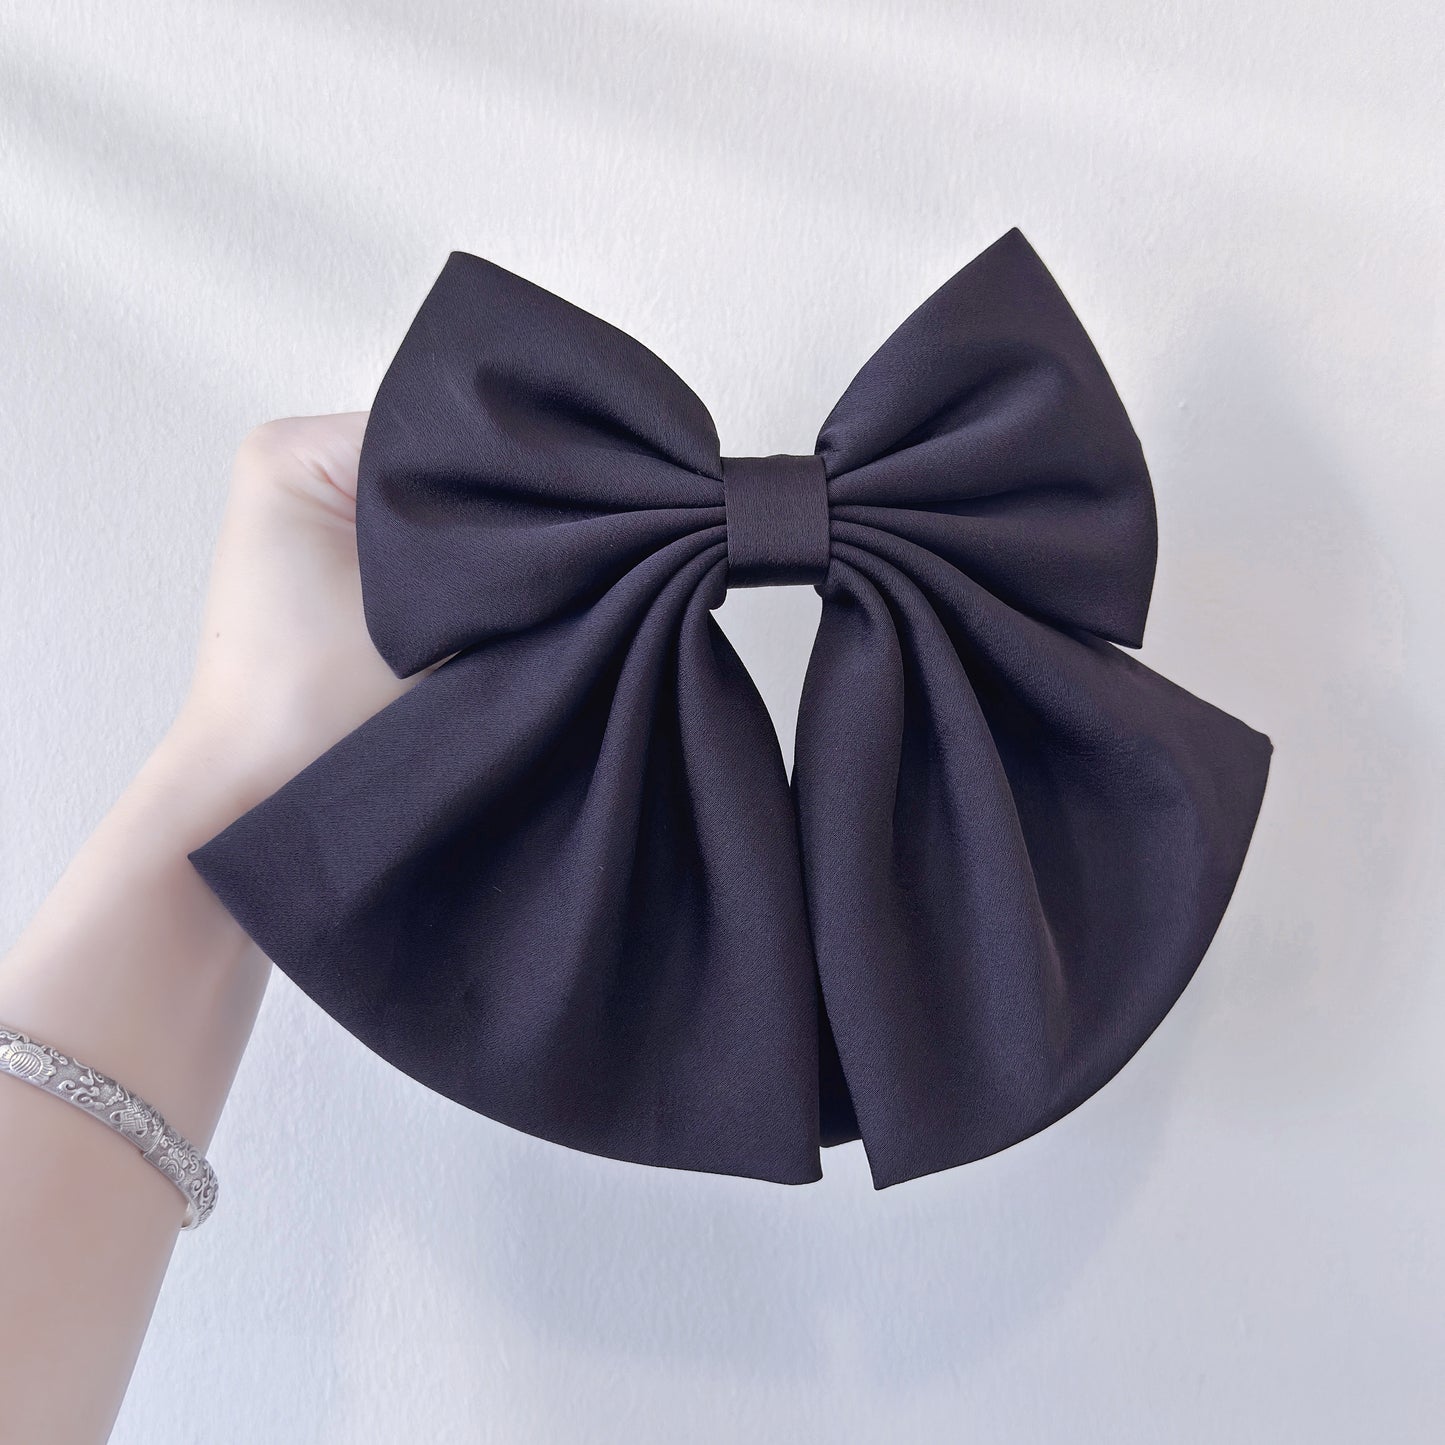 Hair accessories - Satin Bow Hair Clip – Adorable and Elegant Accessory